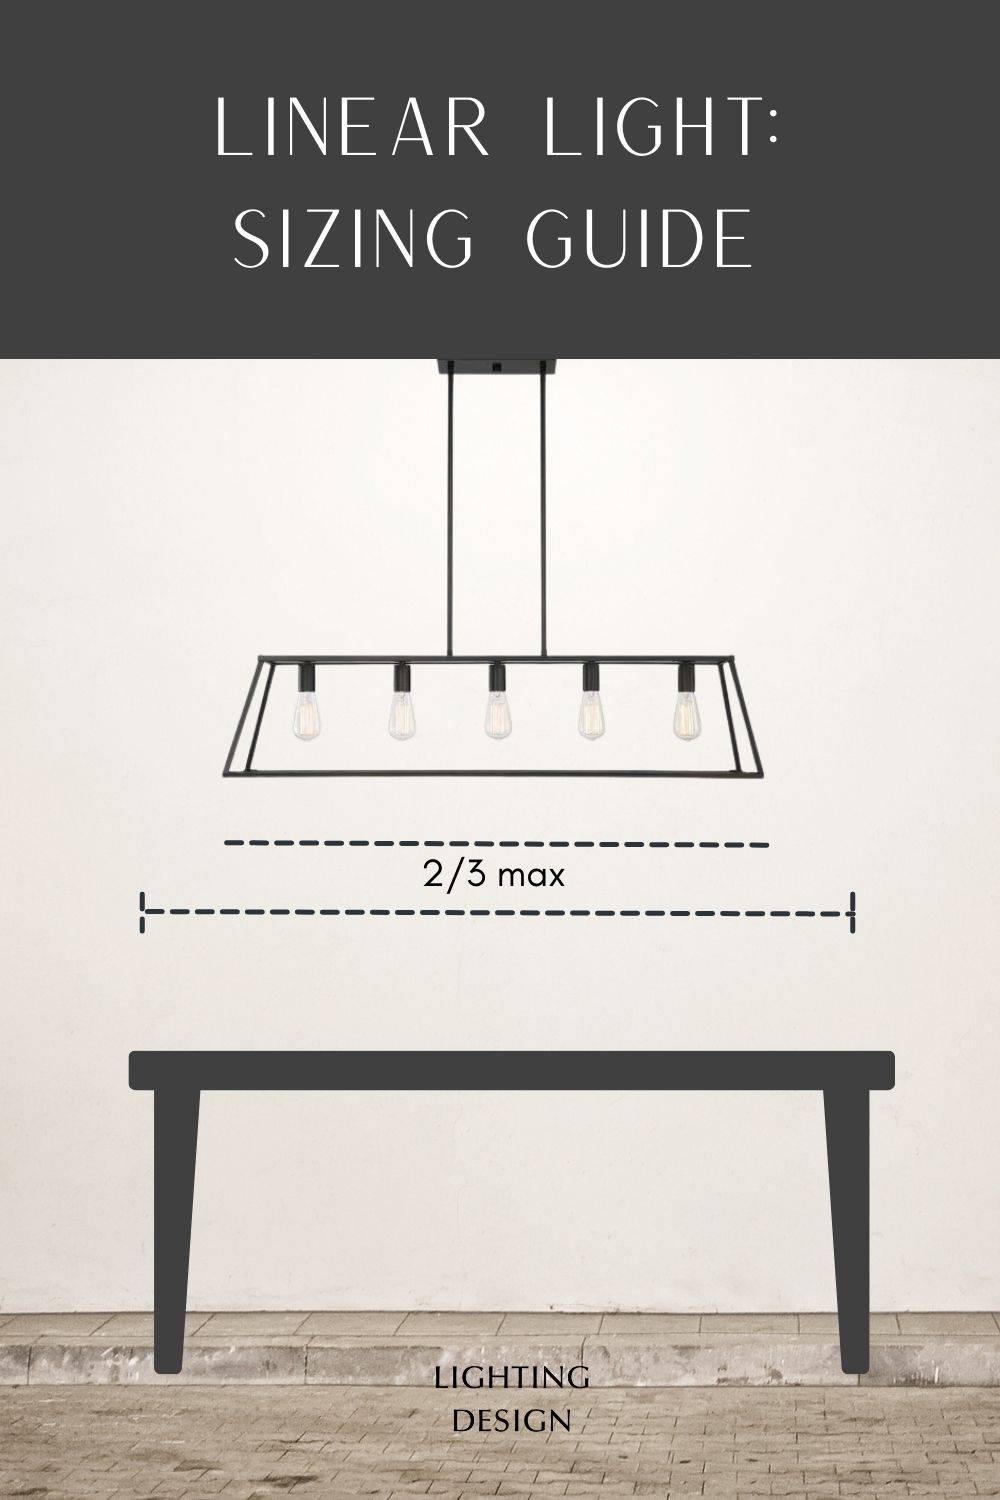 A diagram of a chandelier and a table